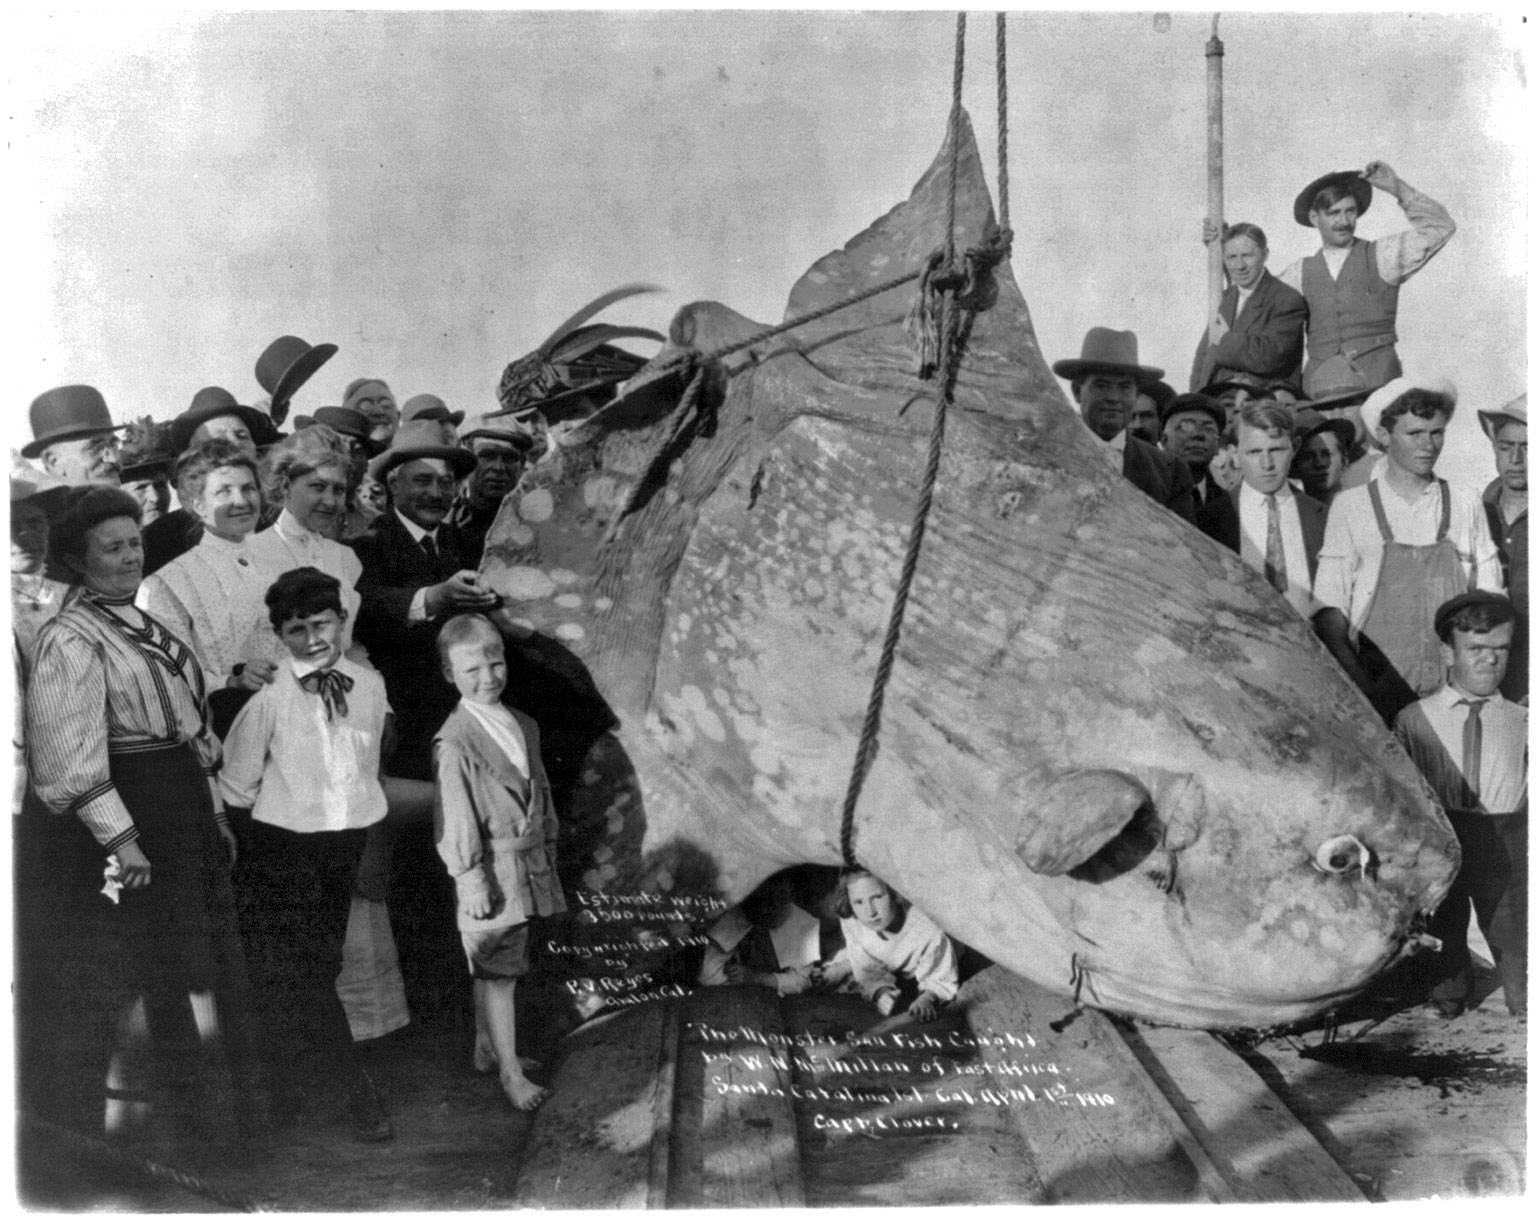 The monster sun fish caught by W.N. McMillan of E. Africa, at Santa Catalina Island, California on April 1, 1910. The weight was estimated at 3,500 lbs. View full size.